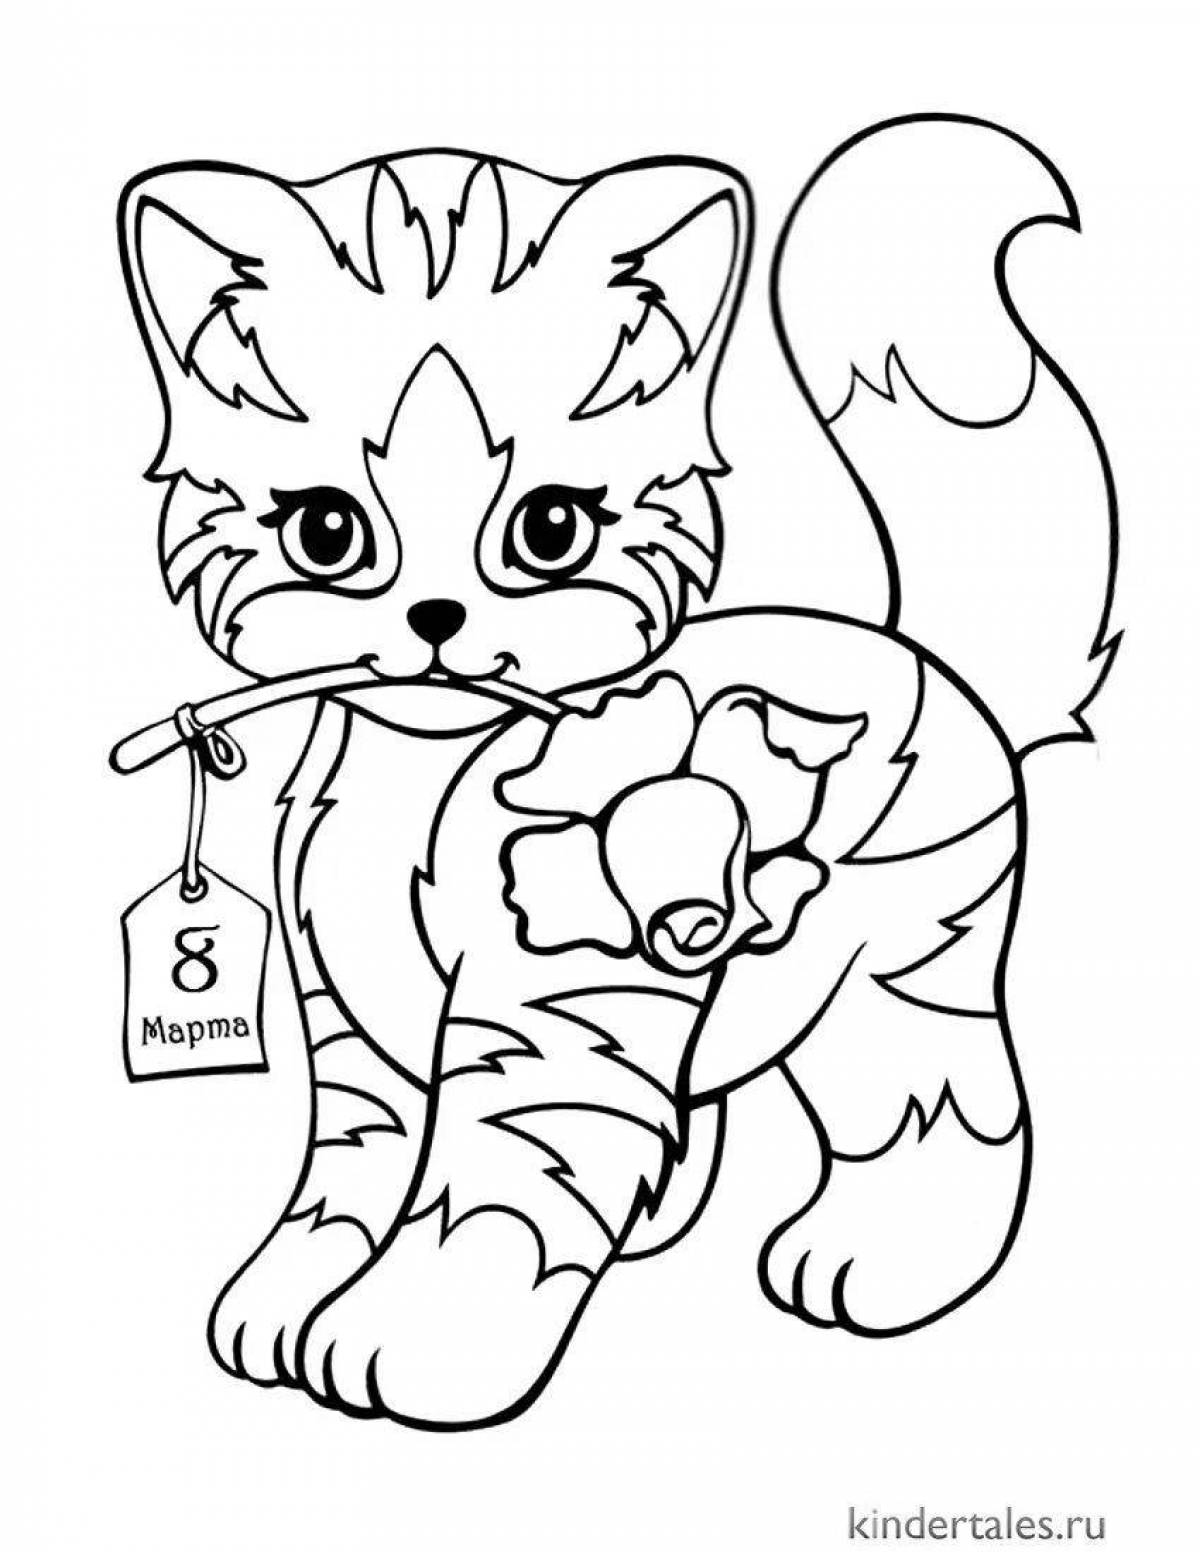 Fancy cat coloring book for 6-7 year olds